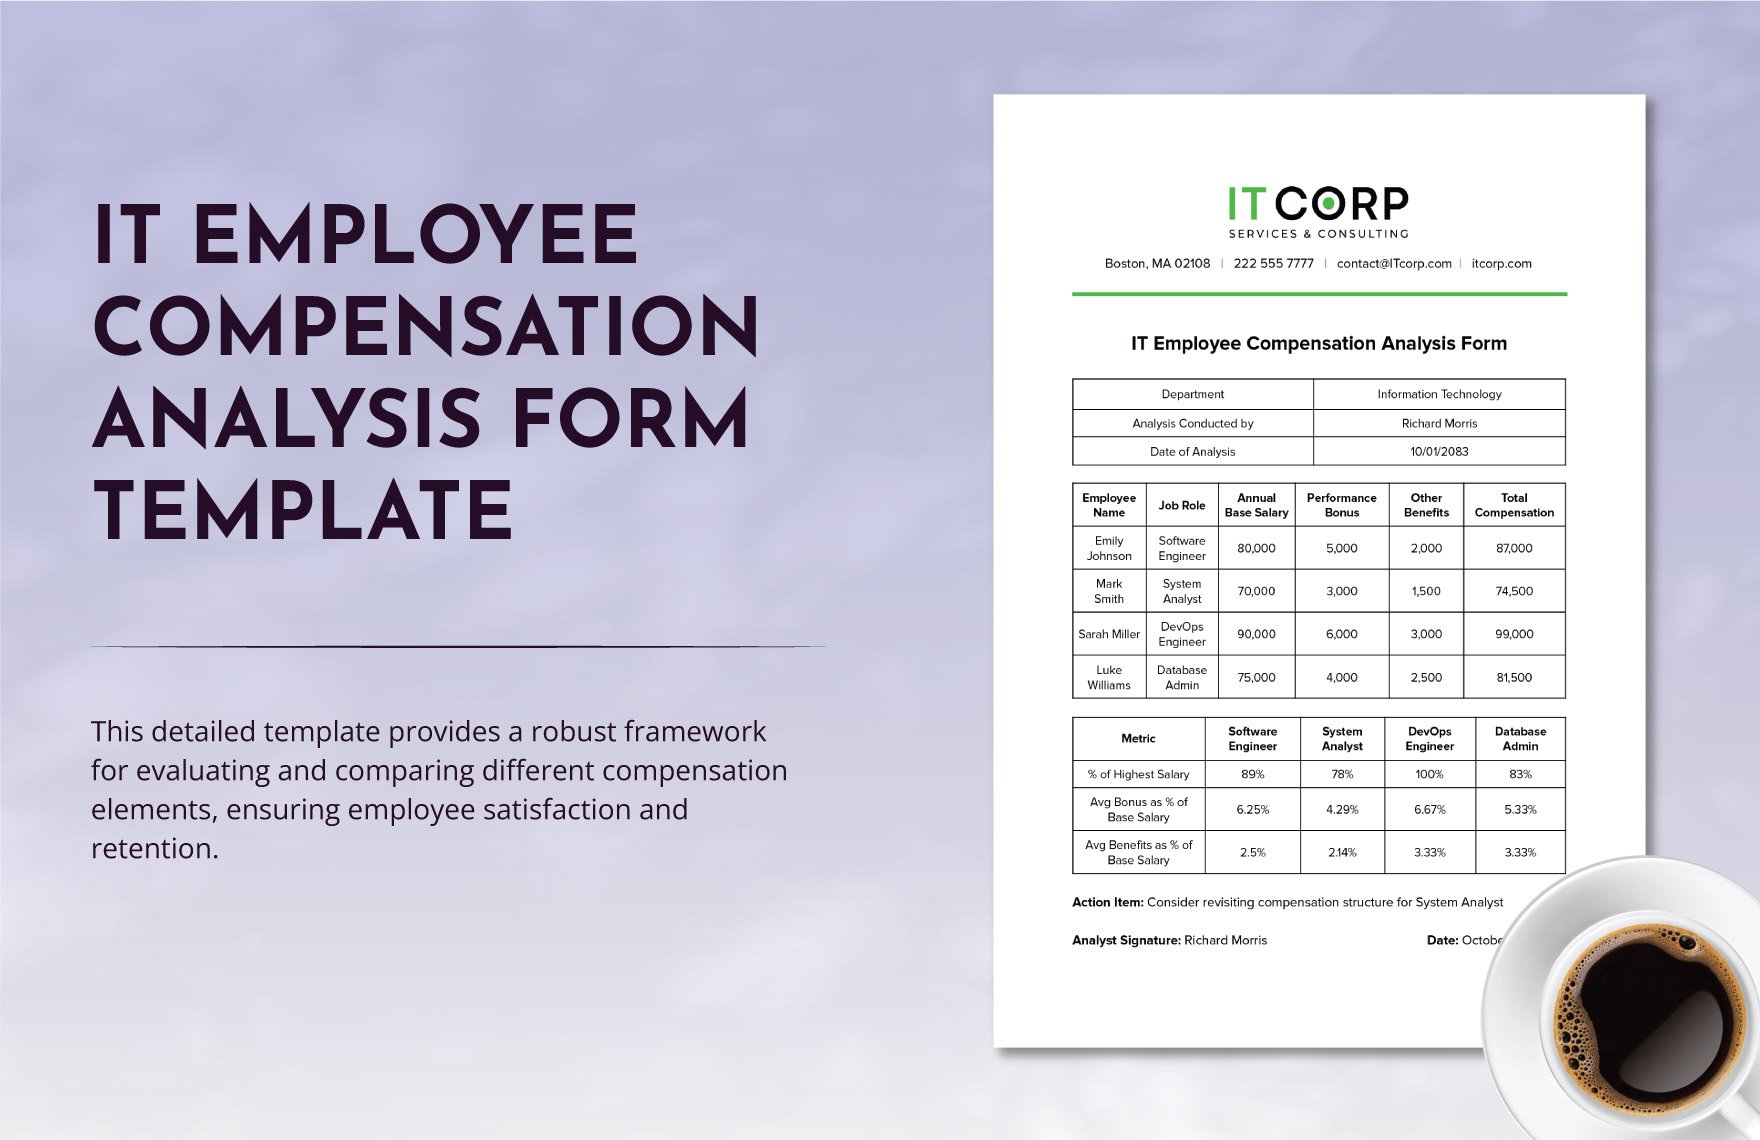 IT Employee Compensation Analysis Form Template